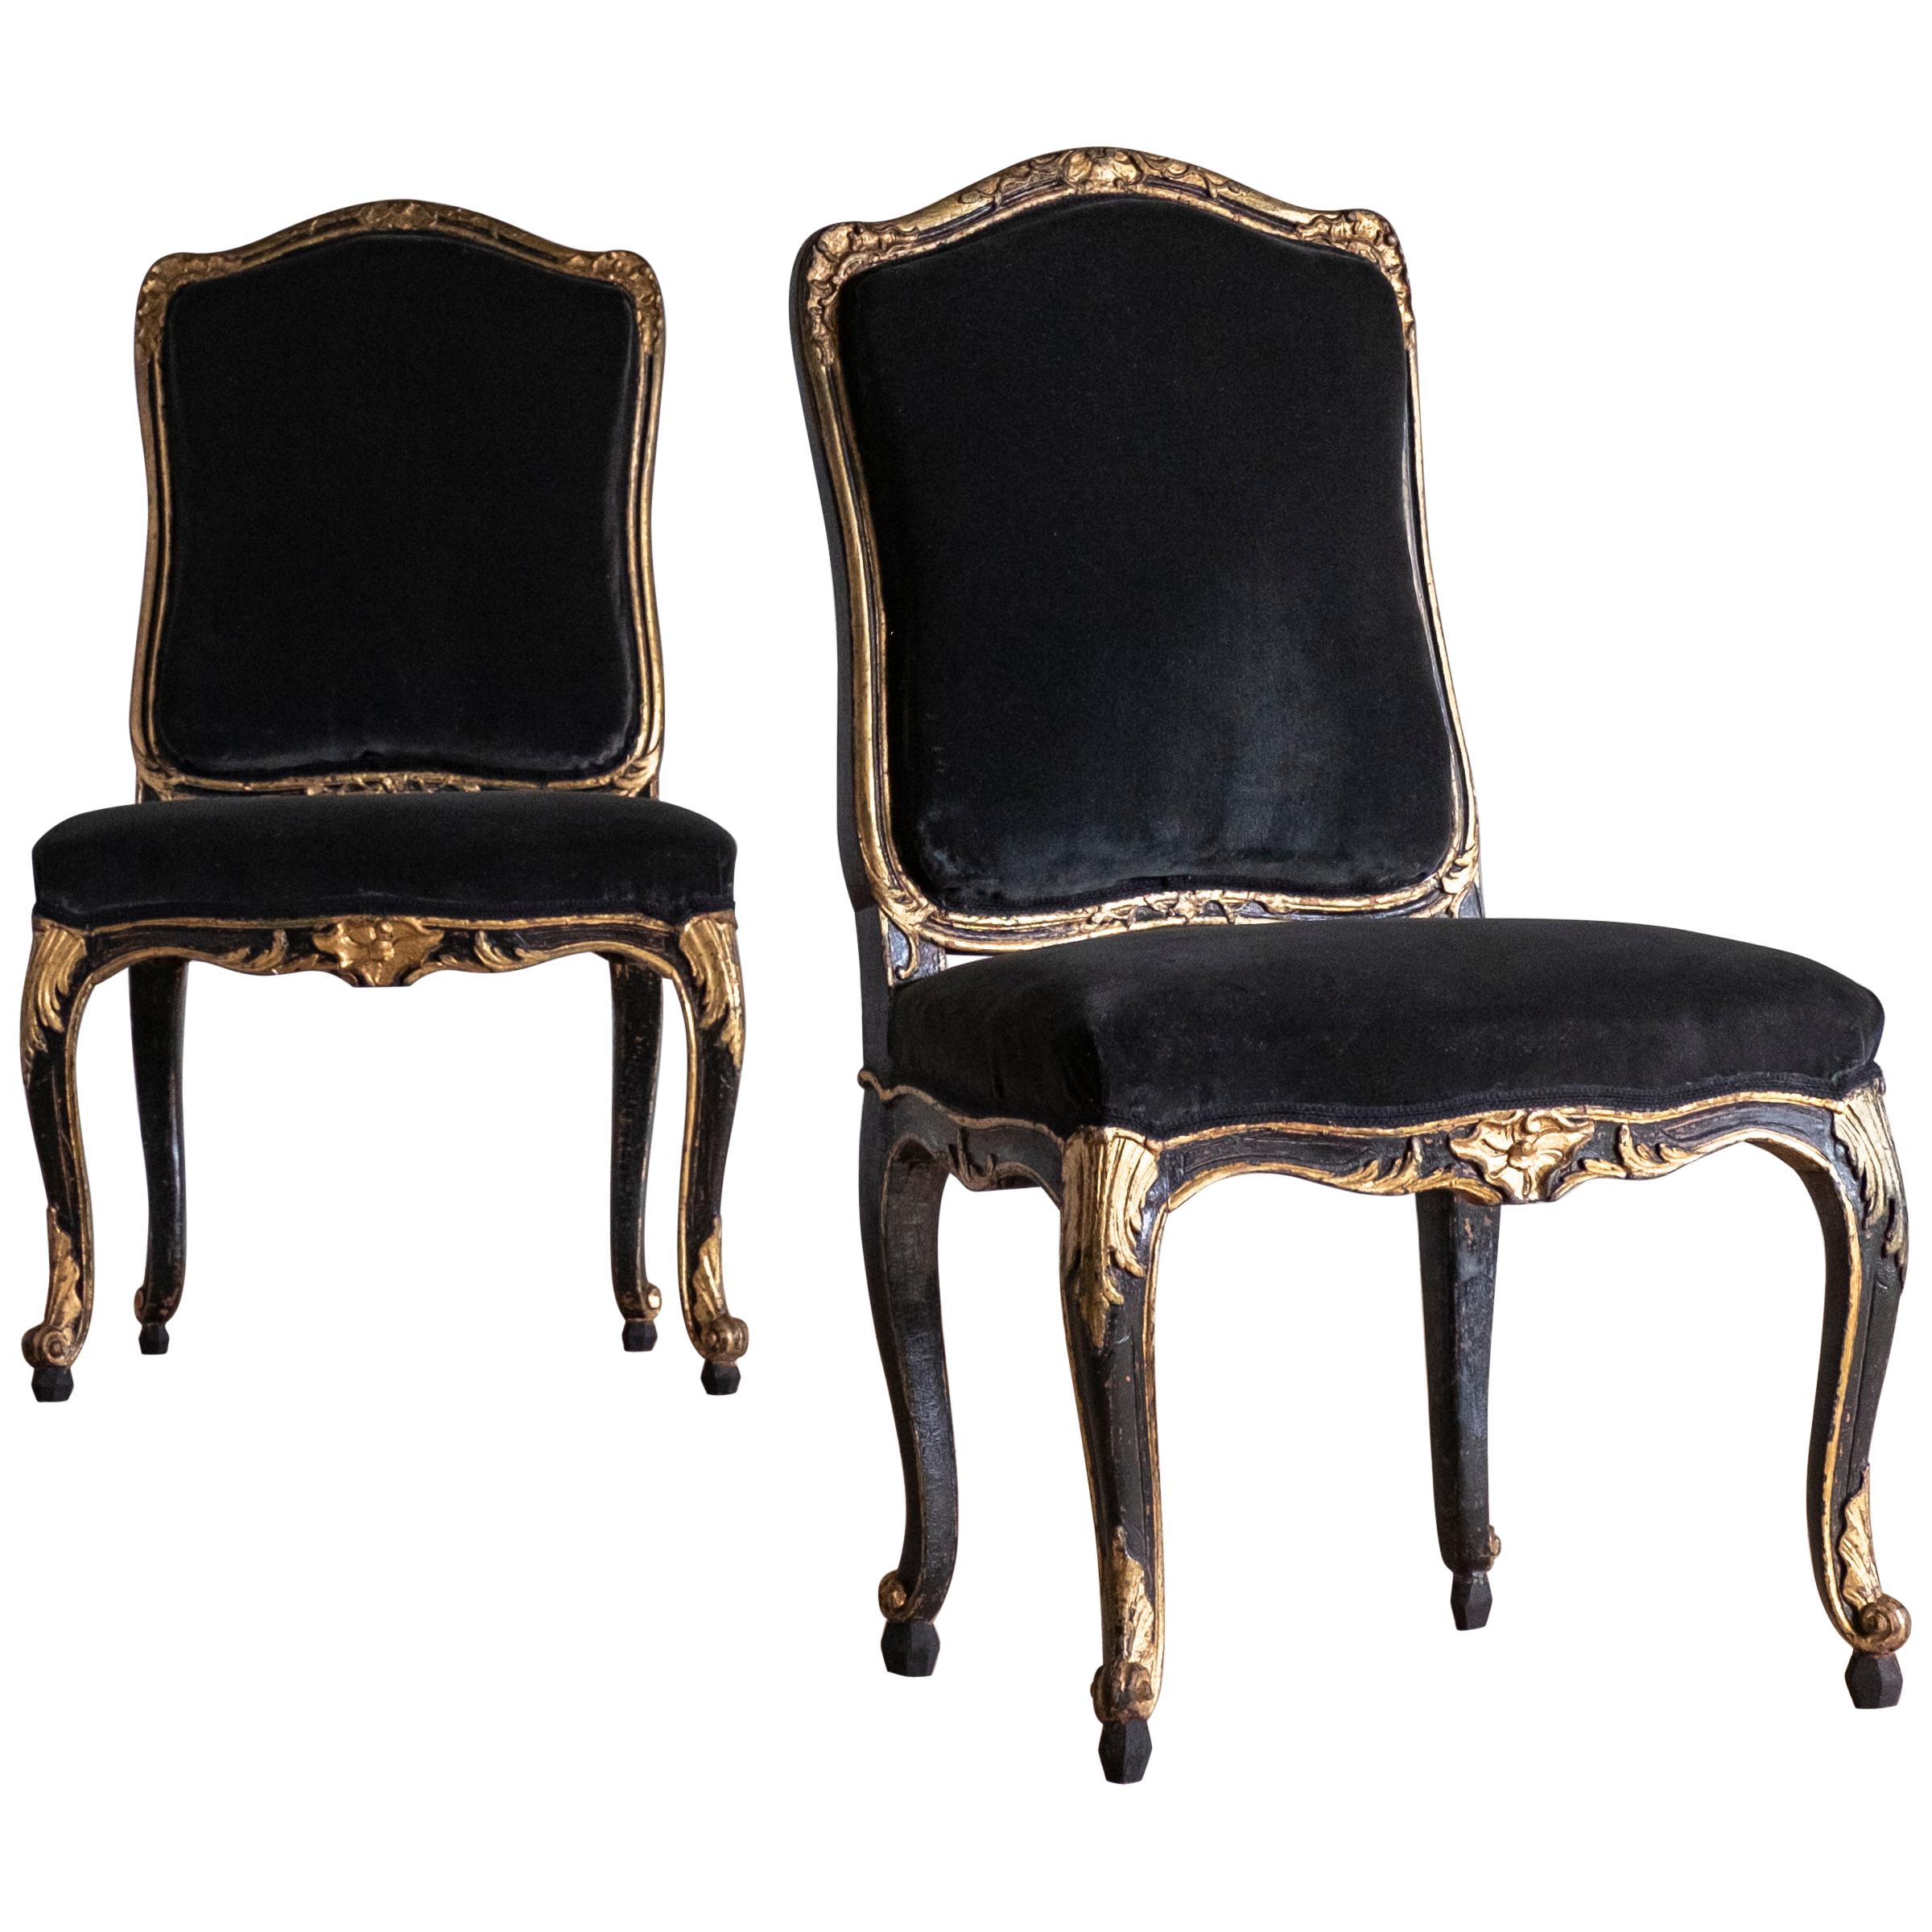 Pair of 18th Century Rococo Chairs